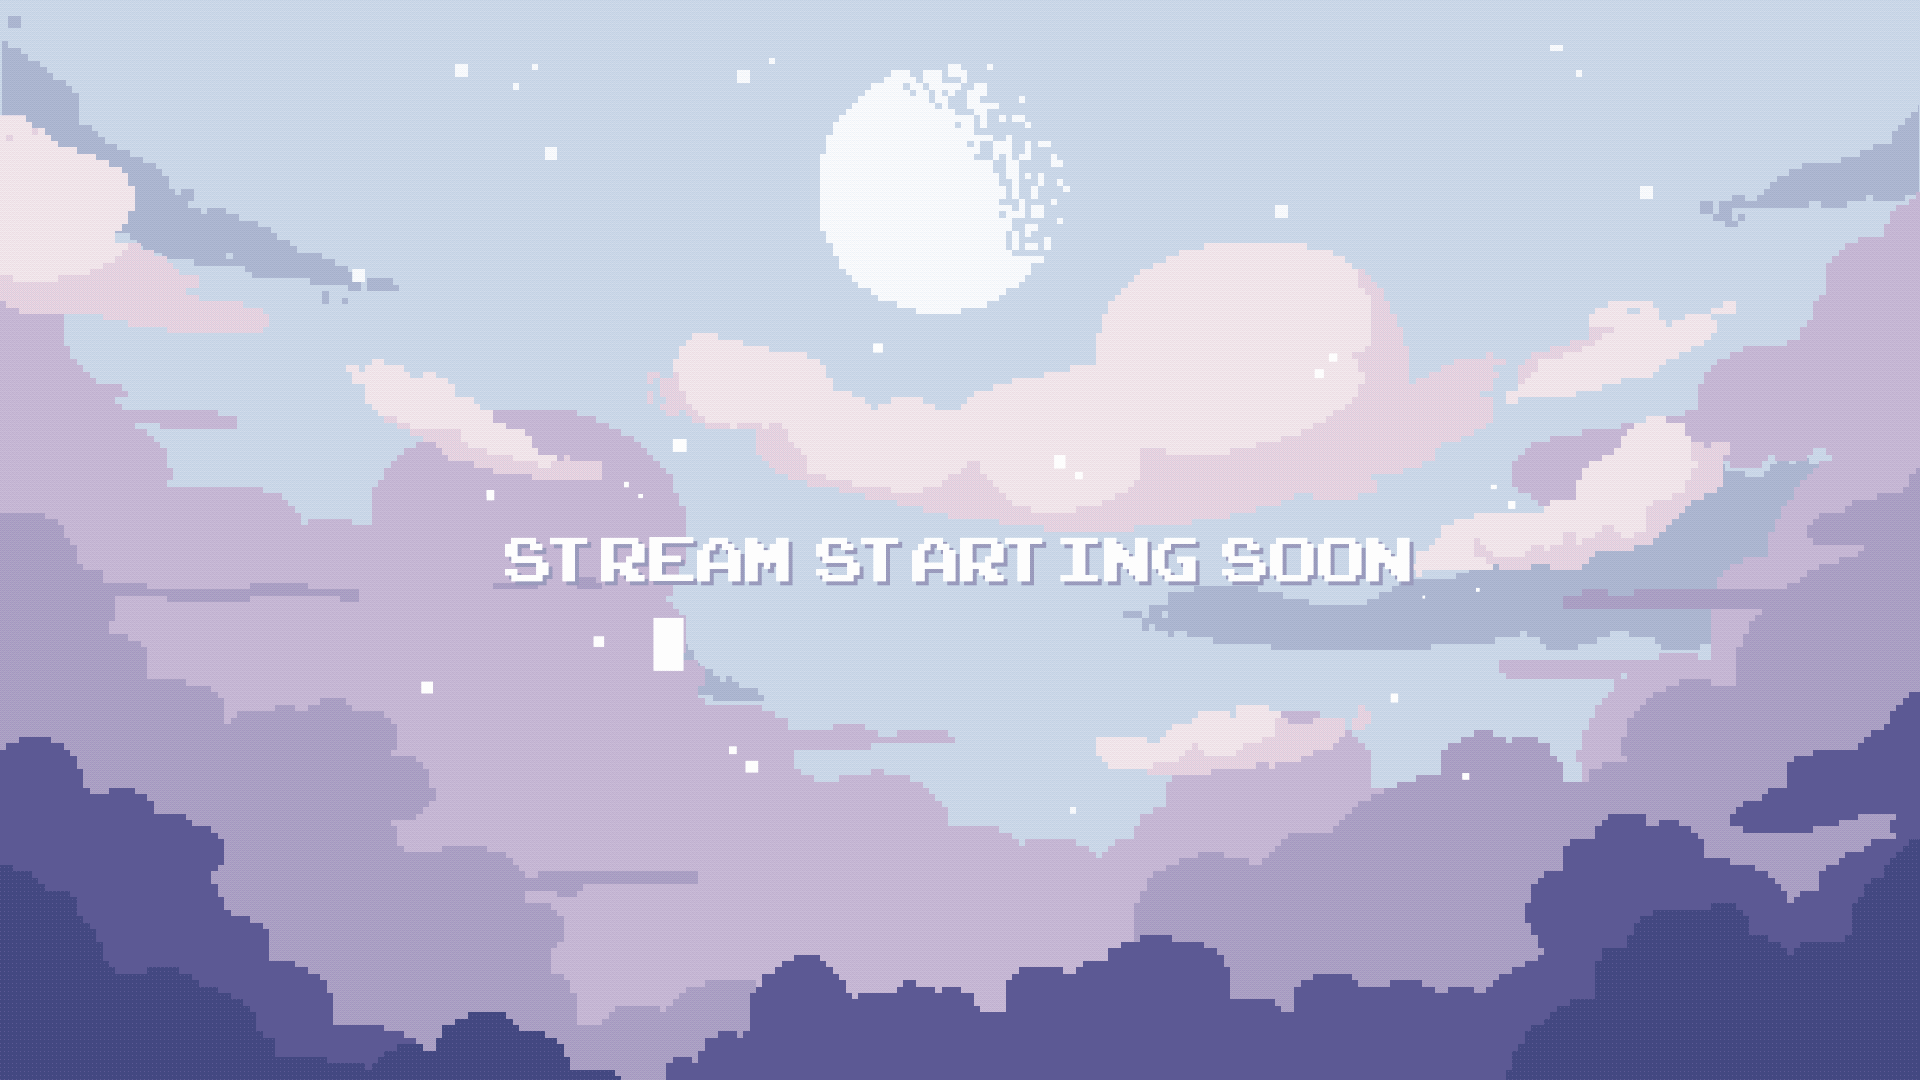 Purple Clouds Animated Twitch Screens Stream Starting Soon. Etsy. Twitch streaming setup, Streaming, Overlays cute